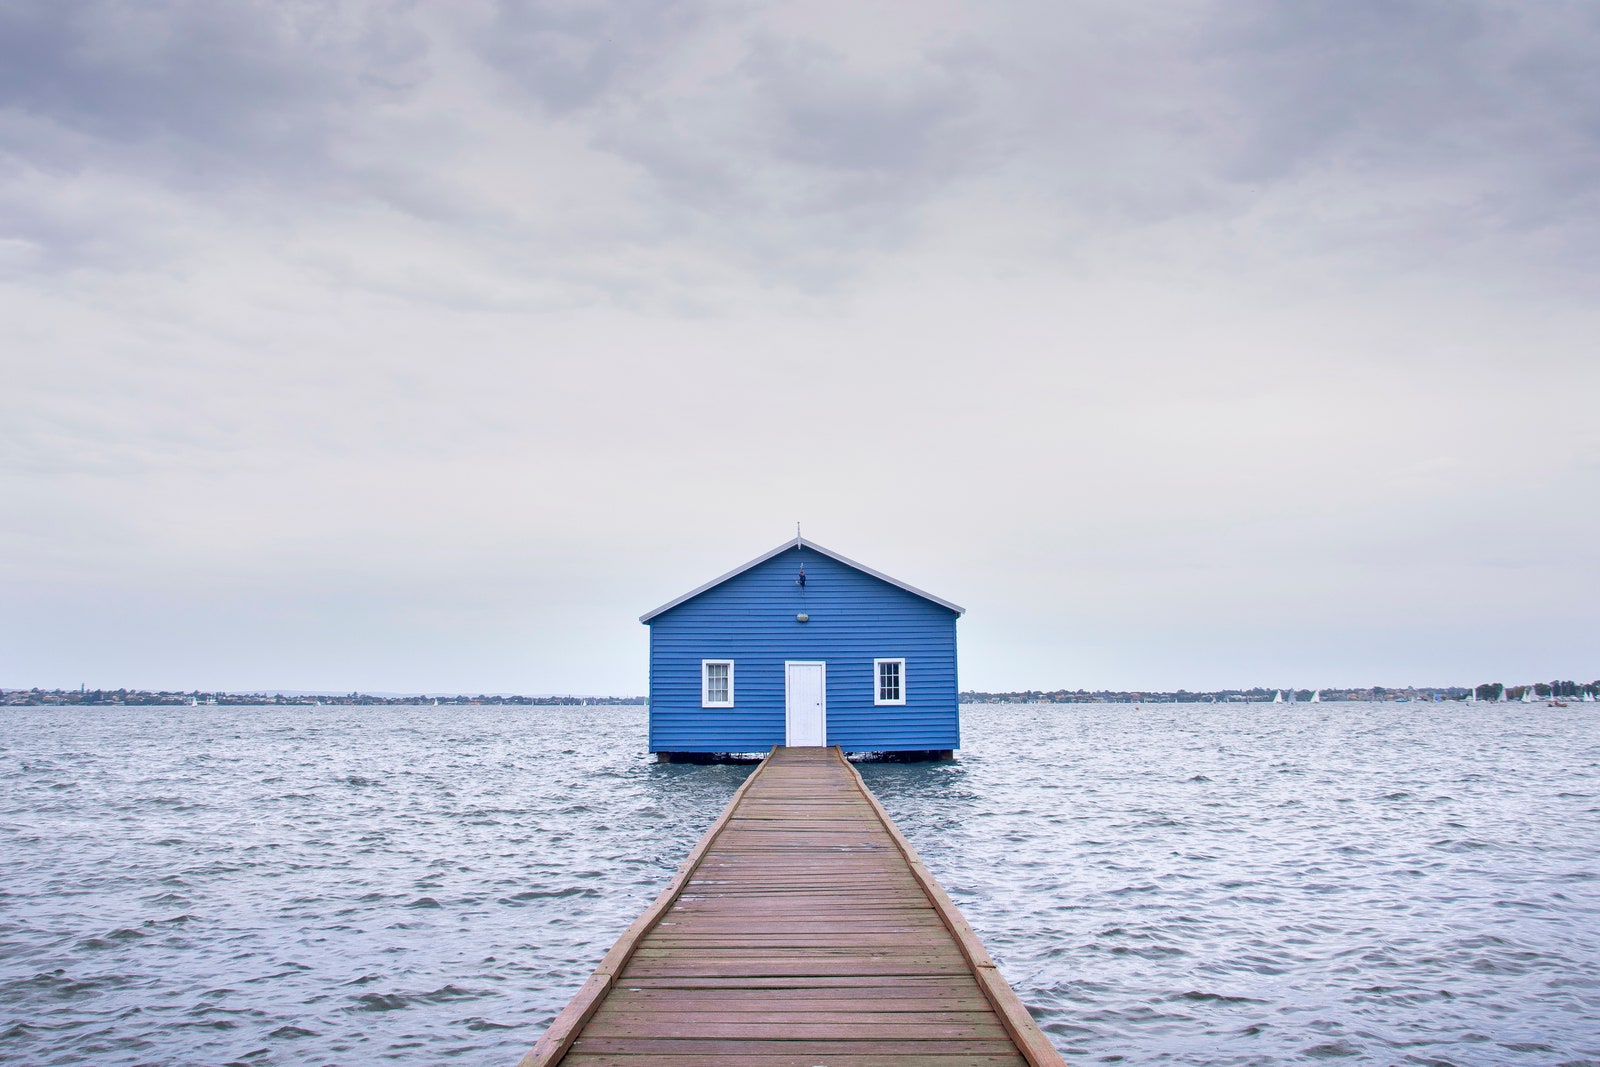 Crawley Edge Boatshed Perth WA Australia c. 1930s. Photo by James Wong. Accidentally Wes Anderson by Wally Koval...